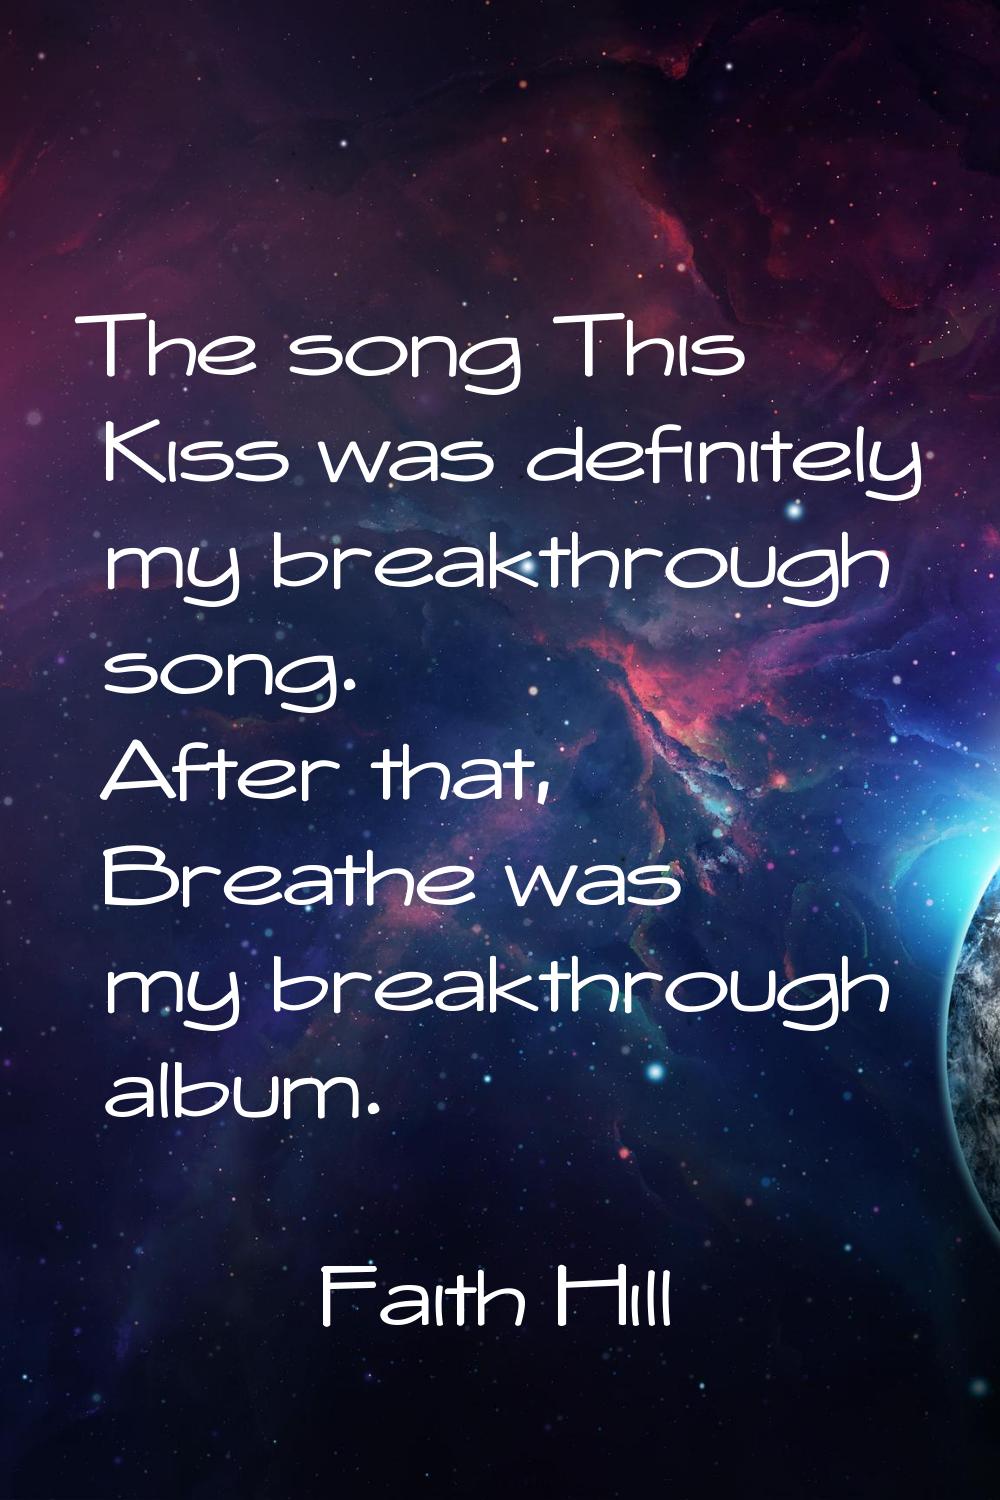 The song This Kiss was definitely my breakthrough song. After that, Breathe was my breakthrough alb